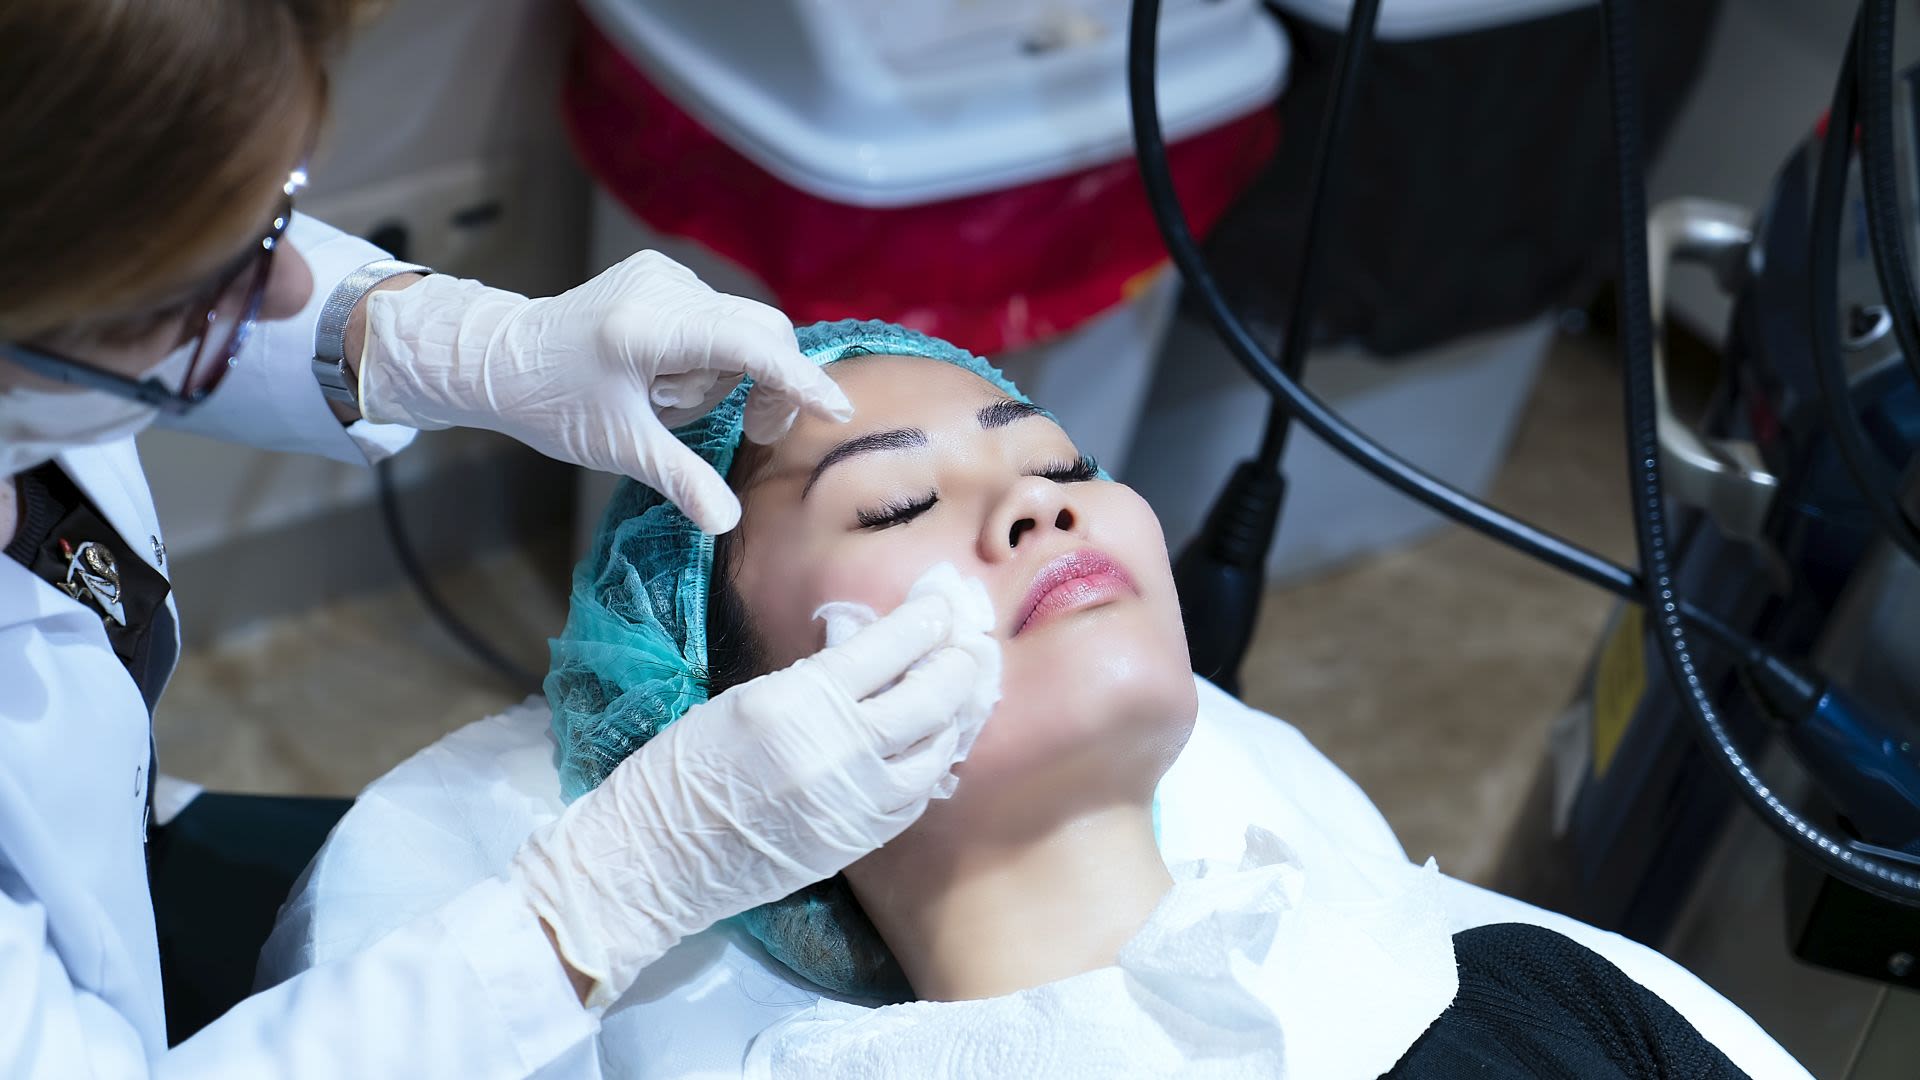 Can You Buy Beauty? 9 Cosmetic Procedures Rich People Get and How Much They Cost